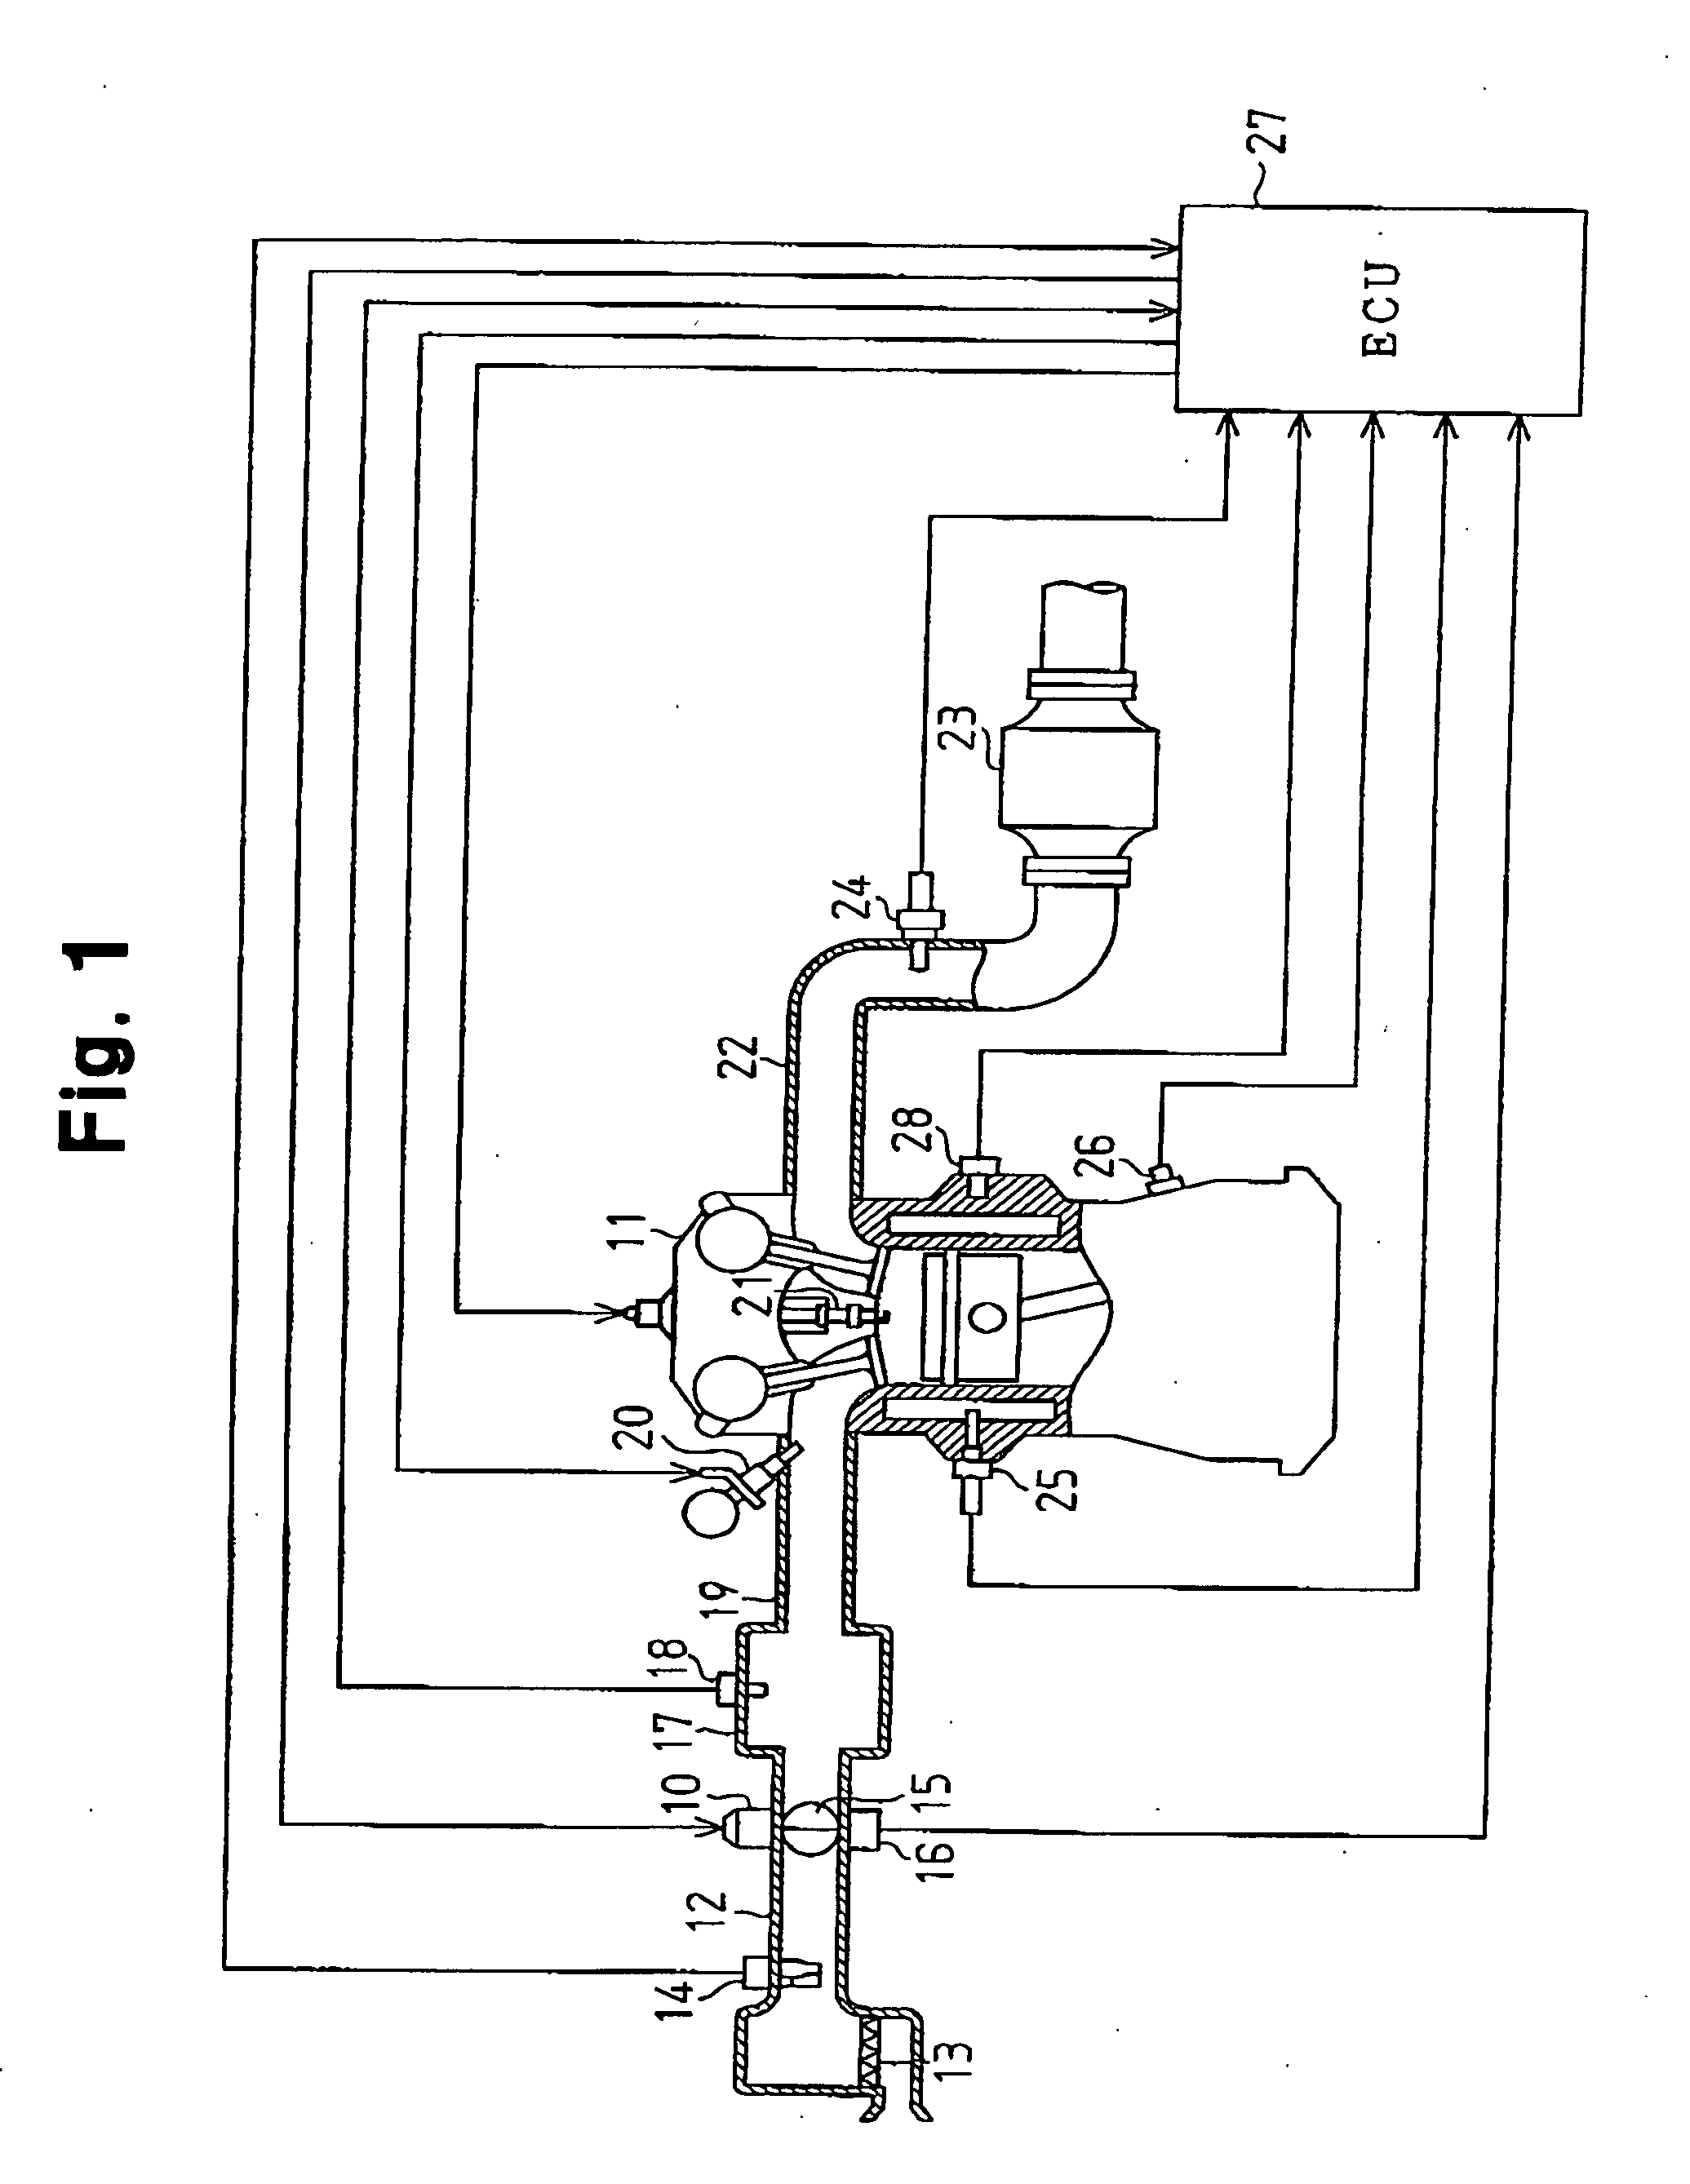 Knock determining apparatus and method for internal combustion engine